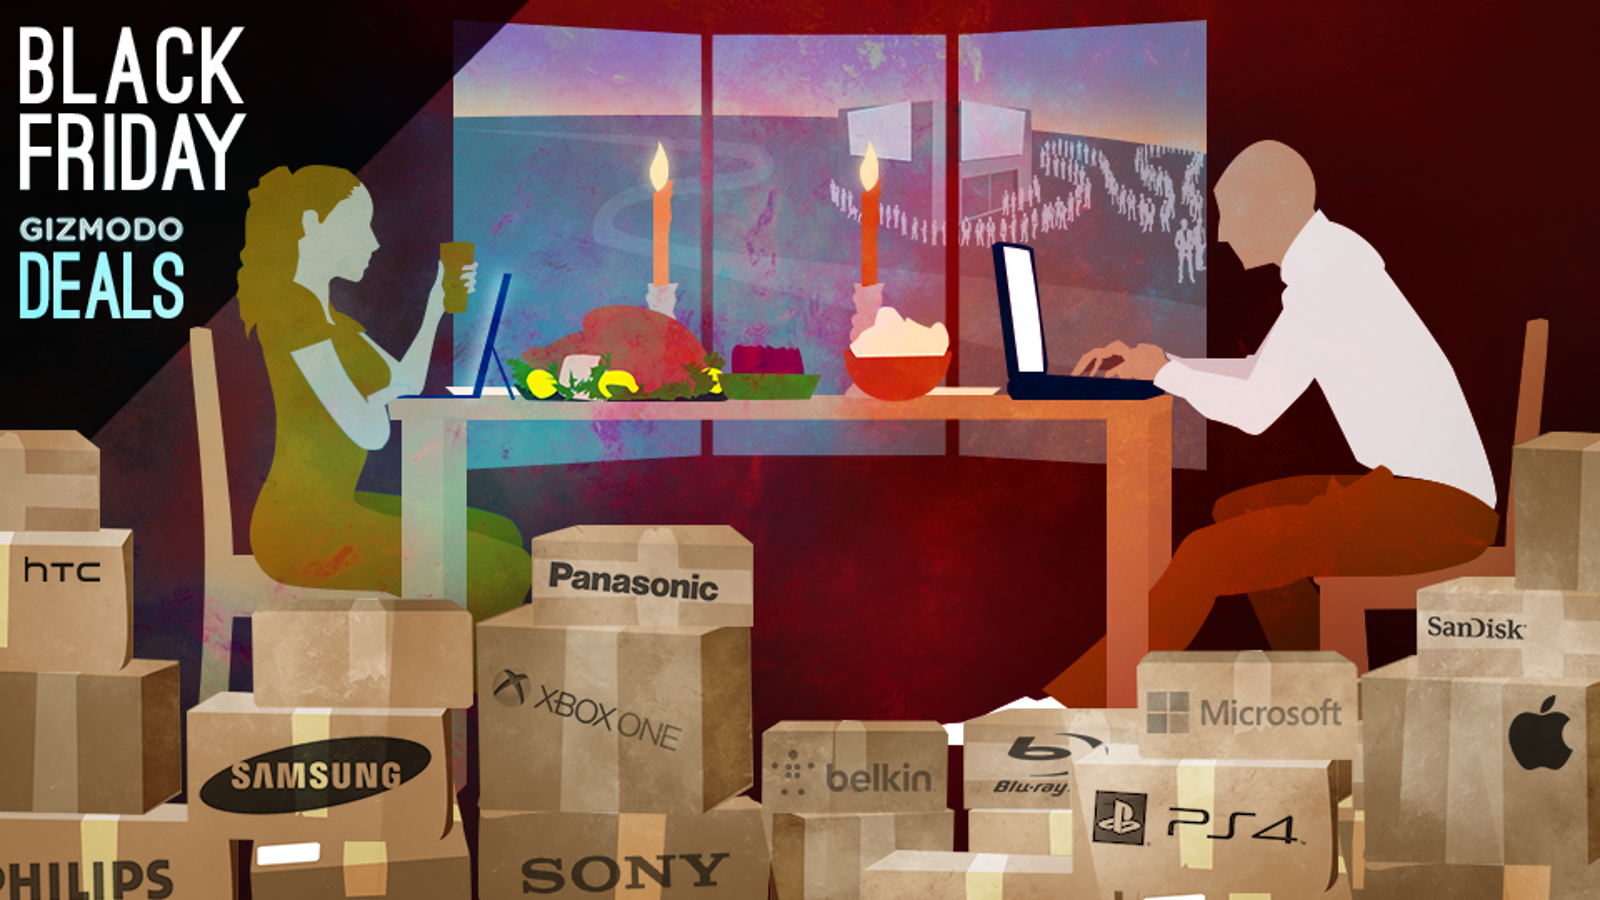 The Best Black Friday Deals of 2013